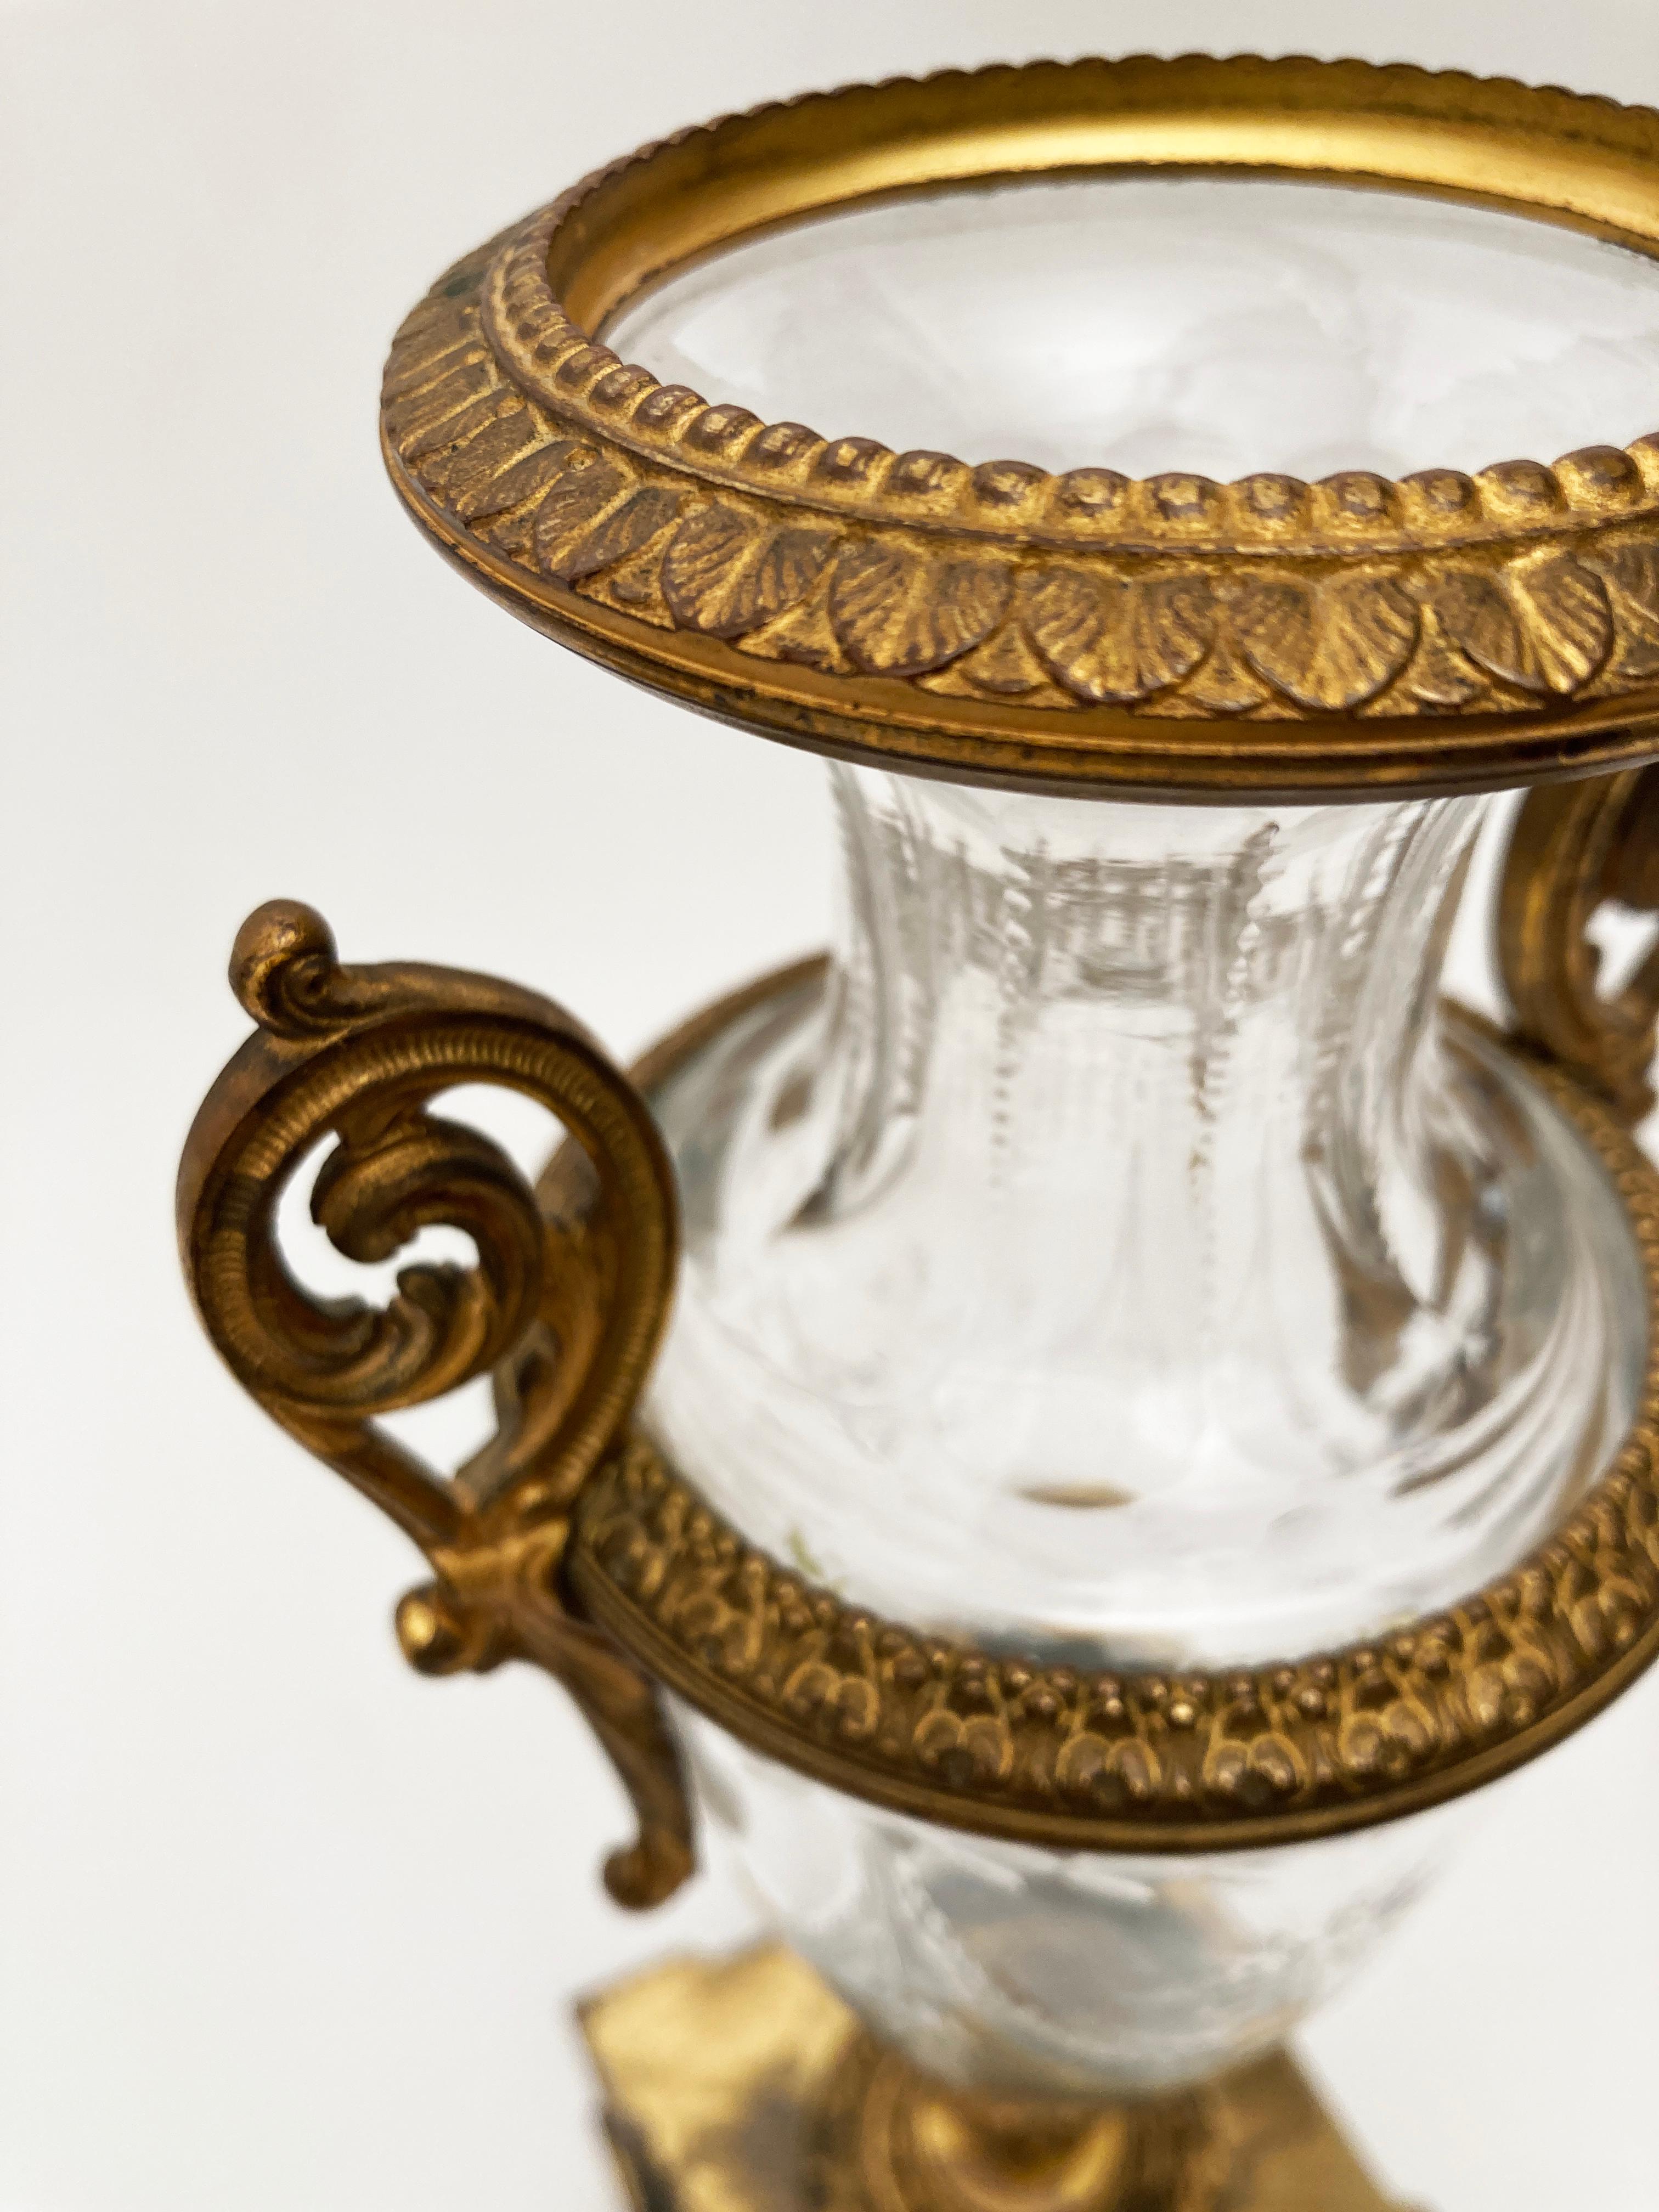 The 19th Century French artisans knew how to design lasting classical beauty. This extraordinary pair of French urns is proof of the mastery put forth in design and construction. From the crystal cut urn with center floral medallion and draped